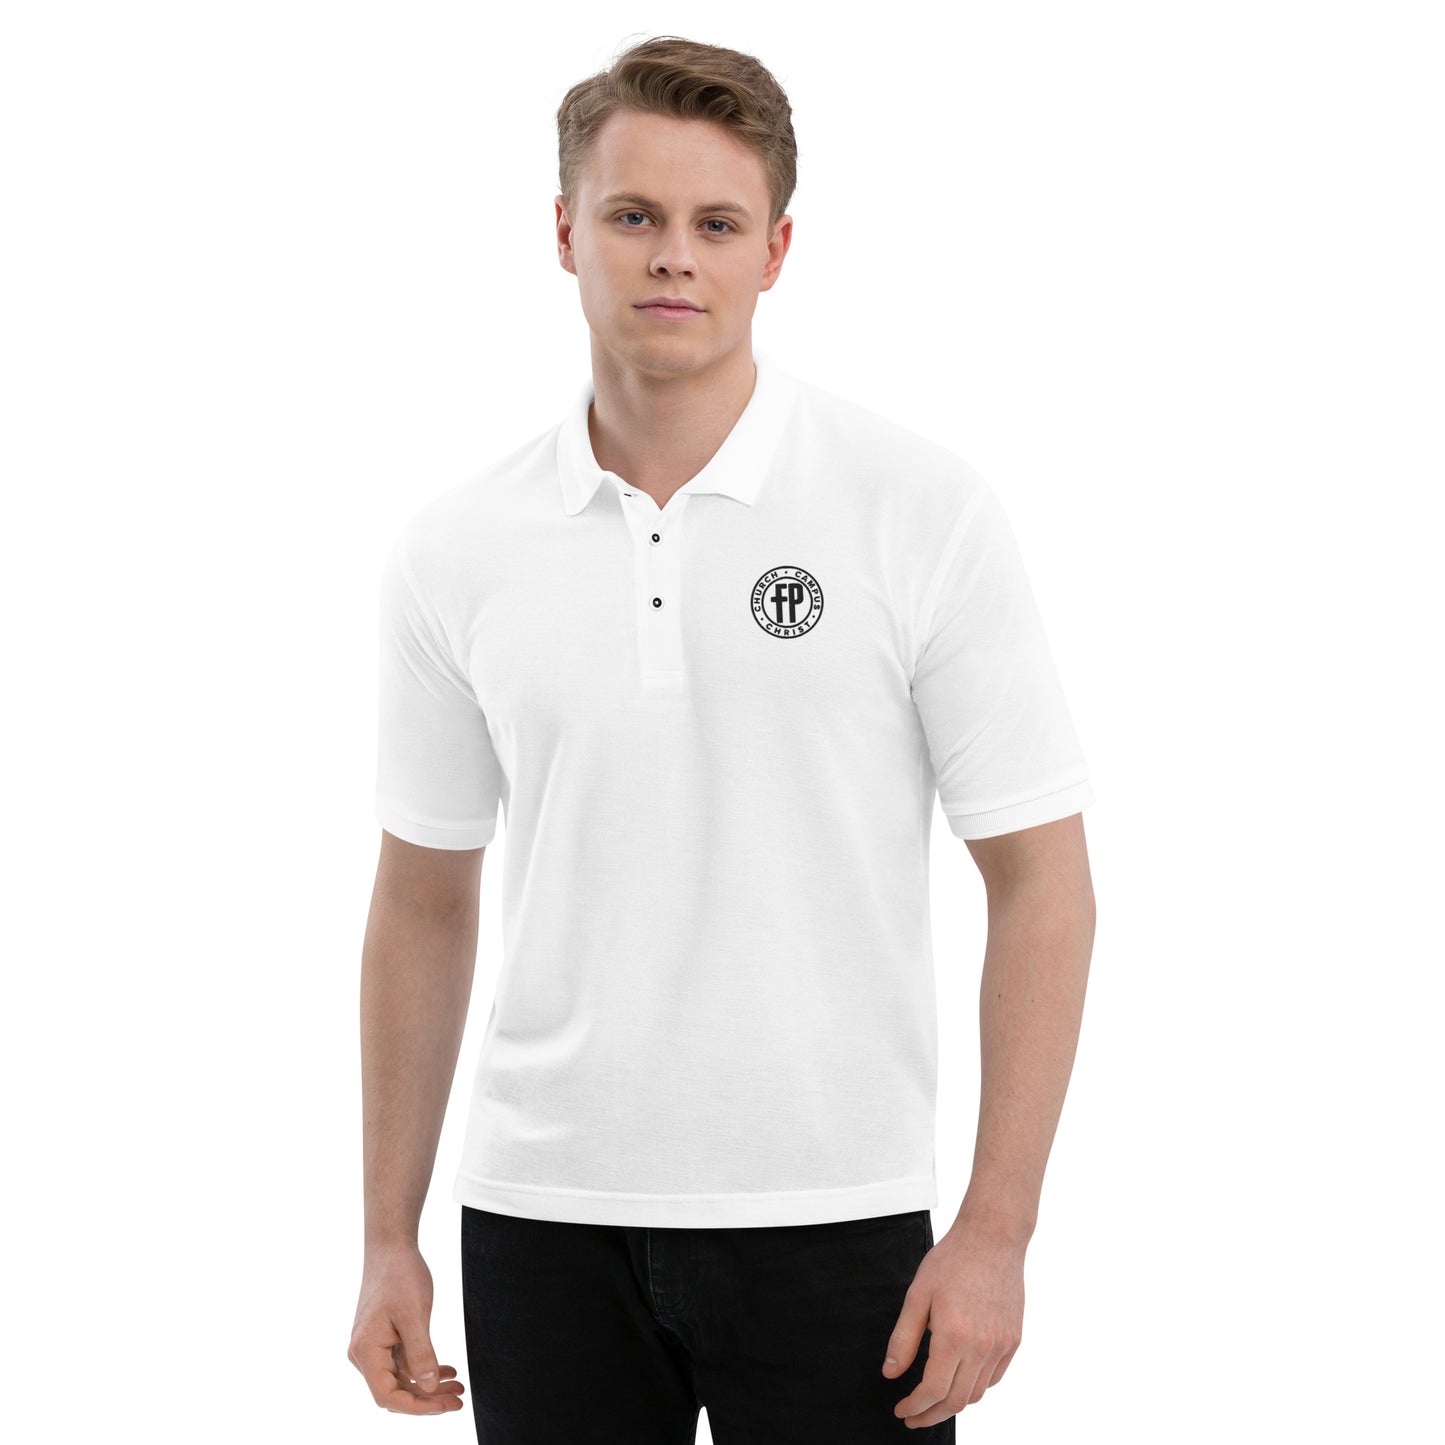 FP Polo Embroidered Black Logo - 2 colors